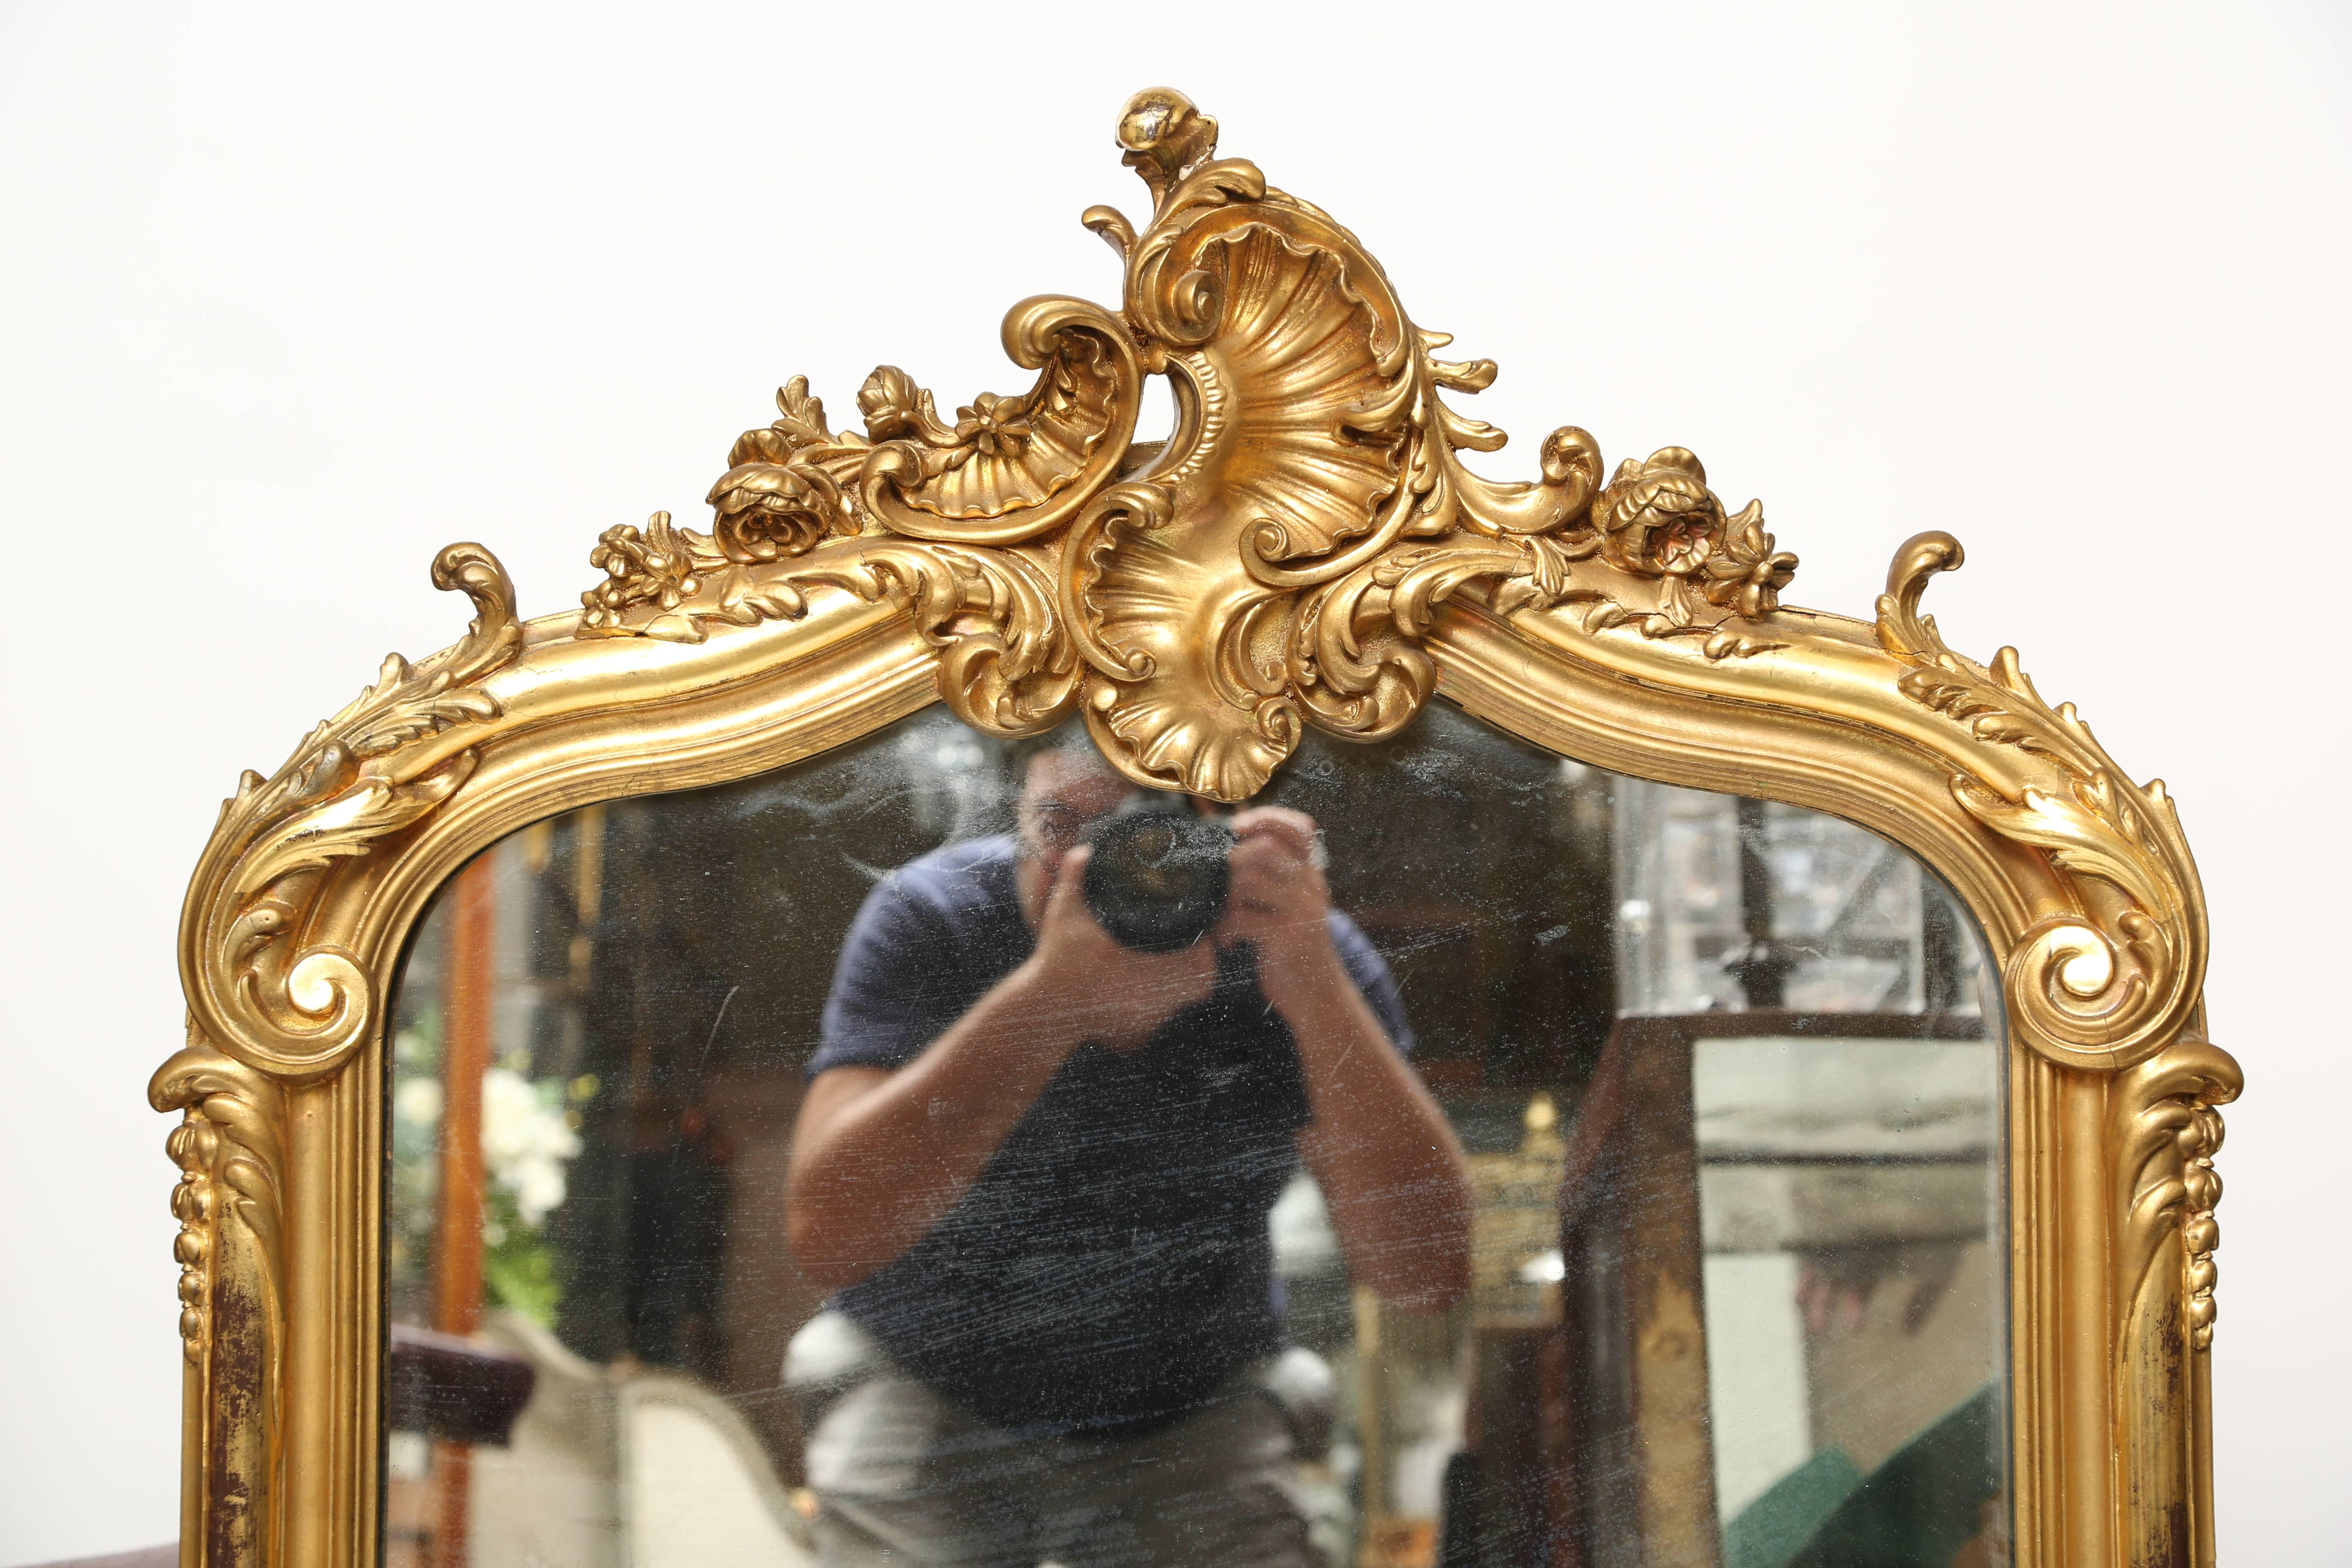 Period Louis Phillippe gilt mirror with acanthus leaves on the corners and 